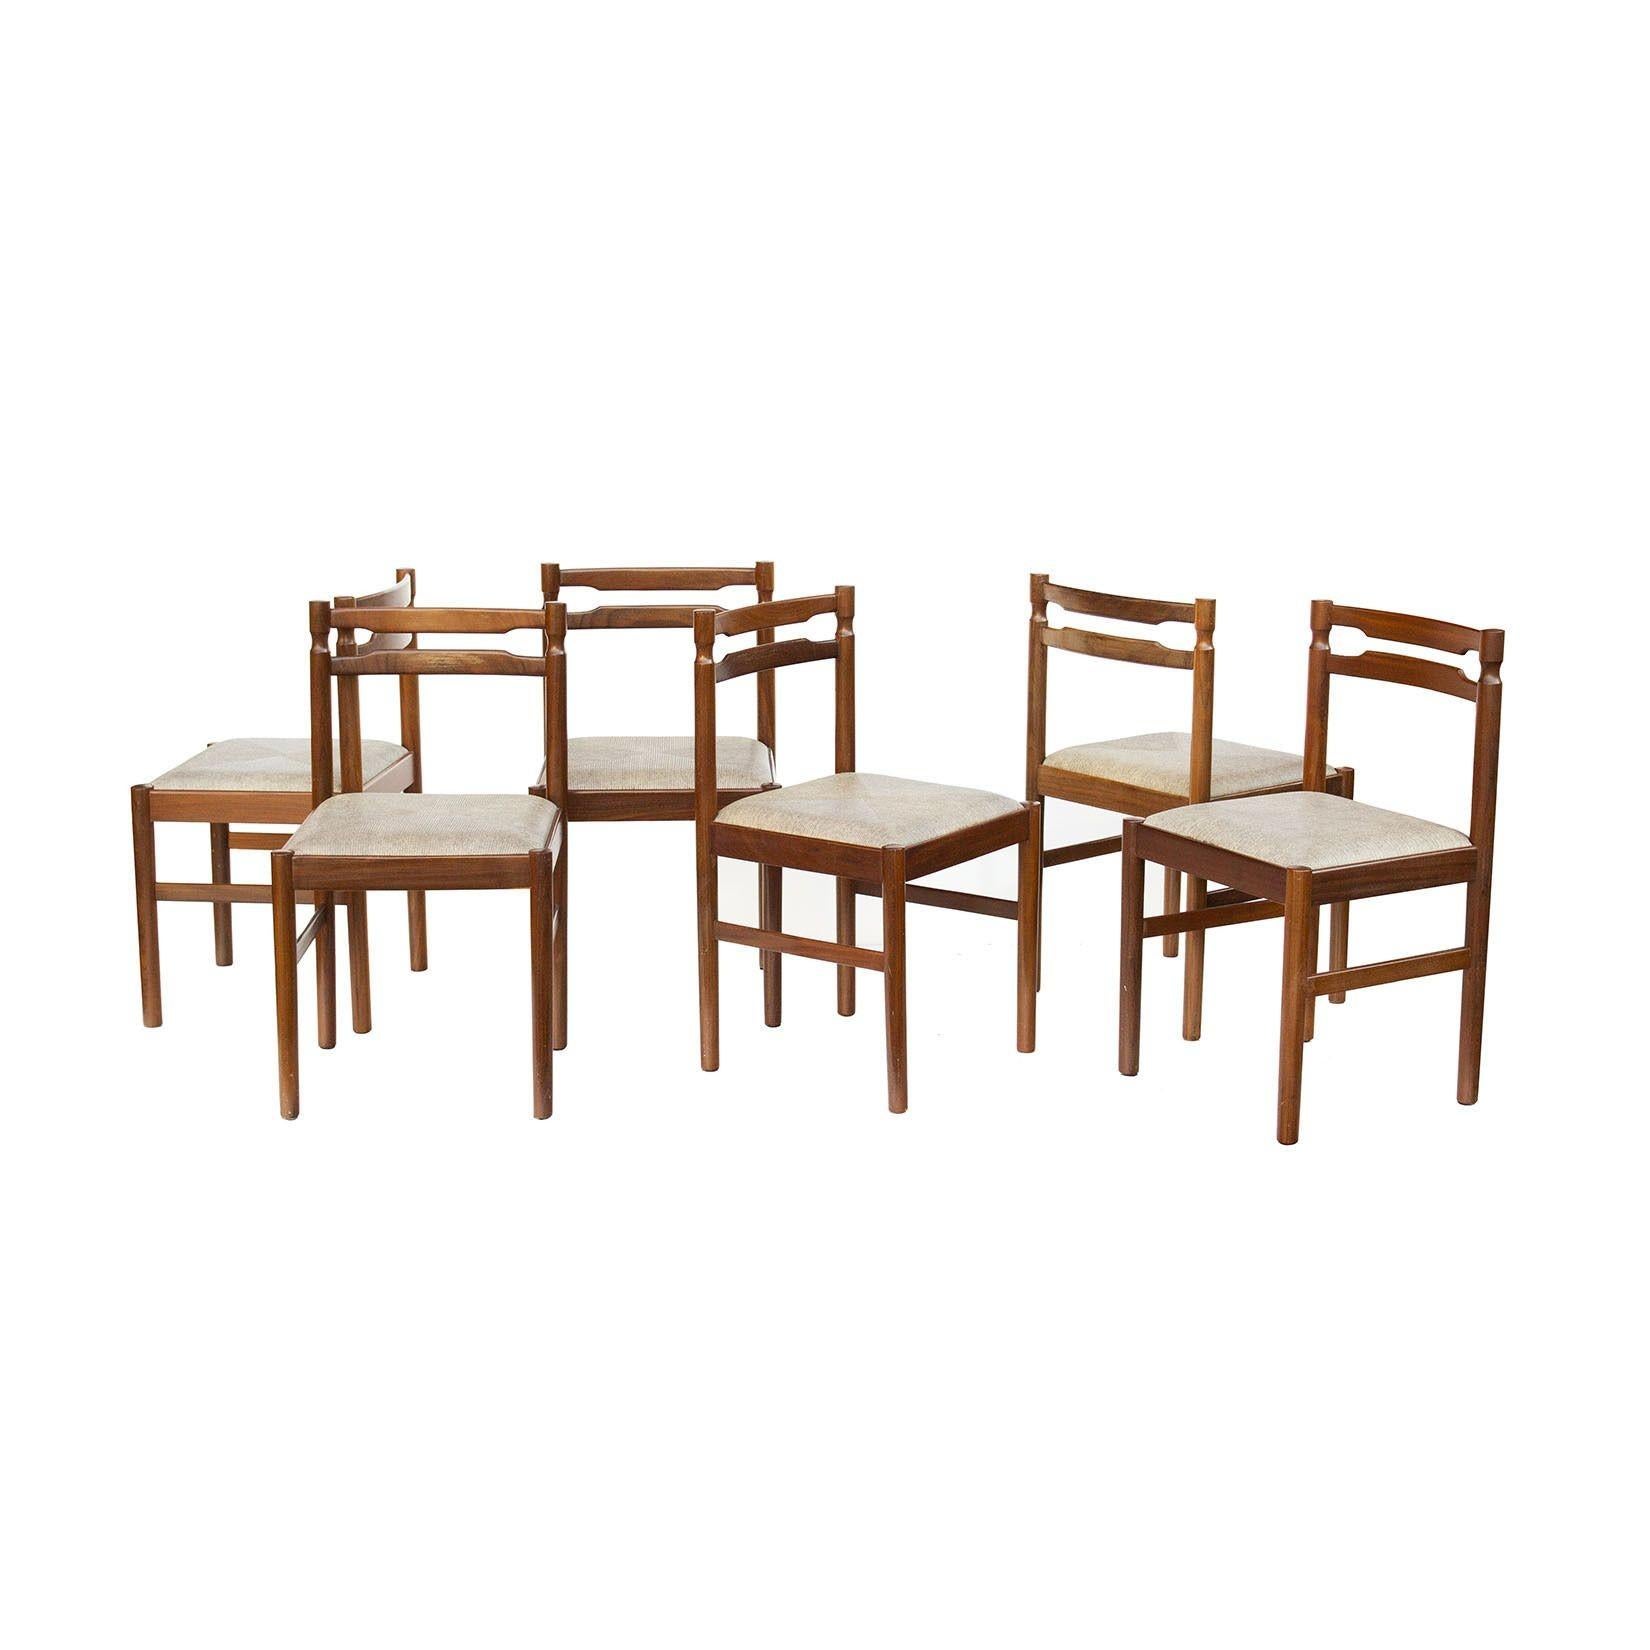 Scandinavia, 1960s
Set of six Scandinavian dining chairs in teak or rosewood. These are a nicely turned set in rich wood tones. Upholstery is in a textured neutral warm grey vinyl and it is in very good condition- usable as is with soft cushions. No